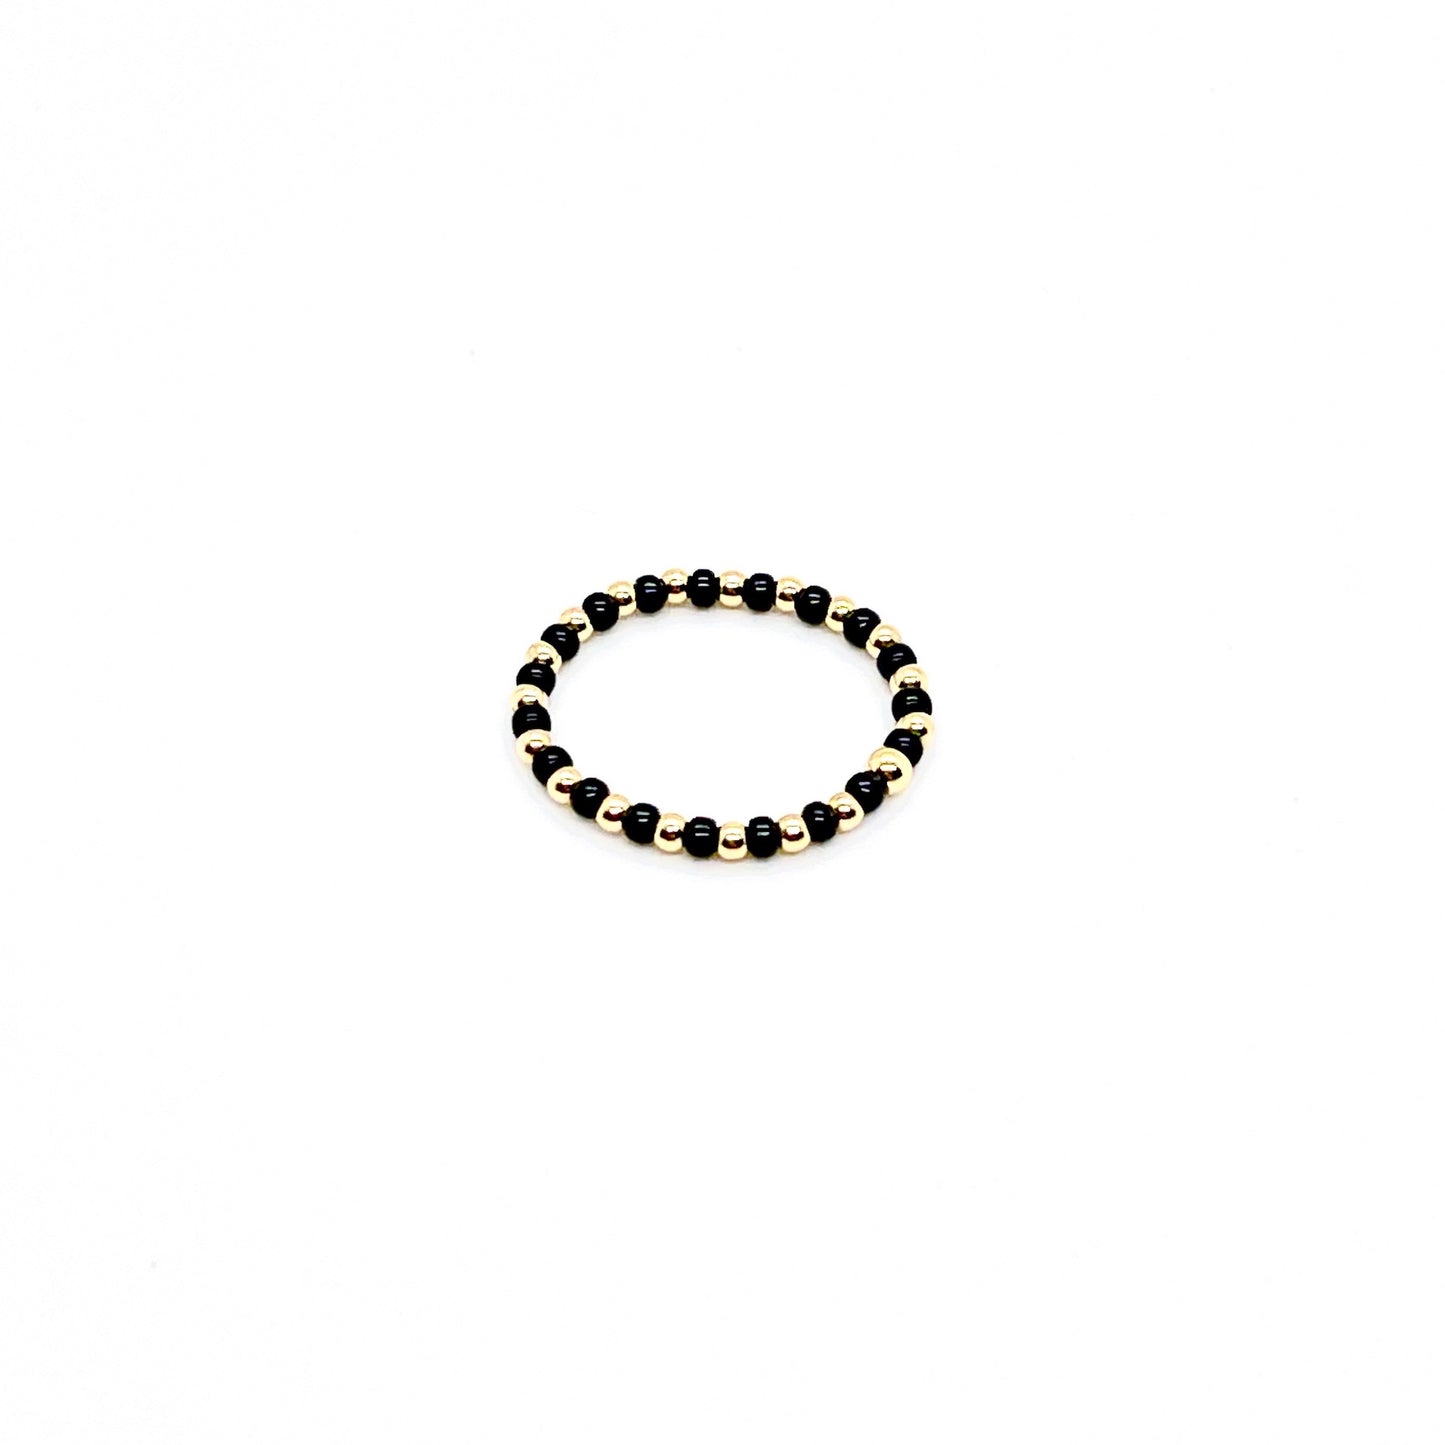 Seed bead ring with alterating black and 2mm 14k gold filled beads on stretch cord.